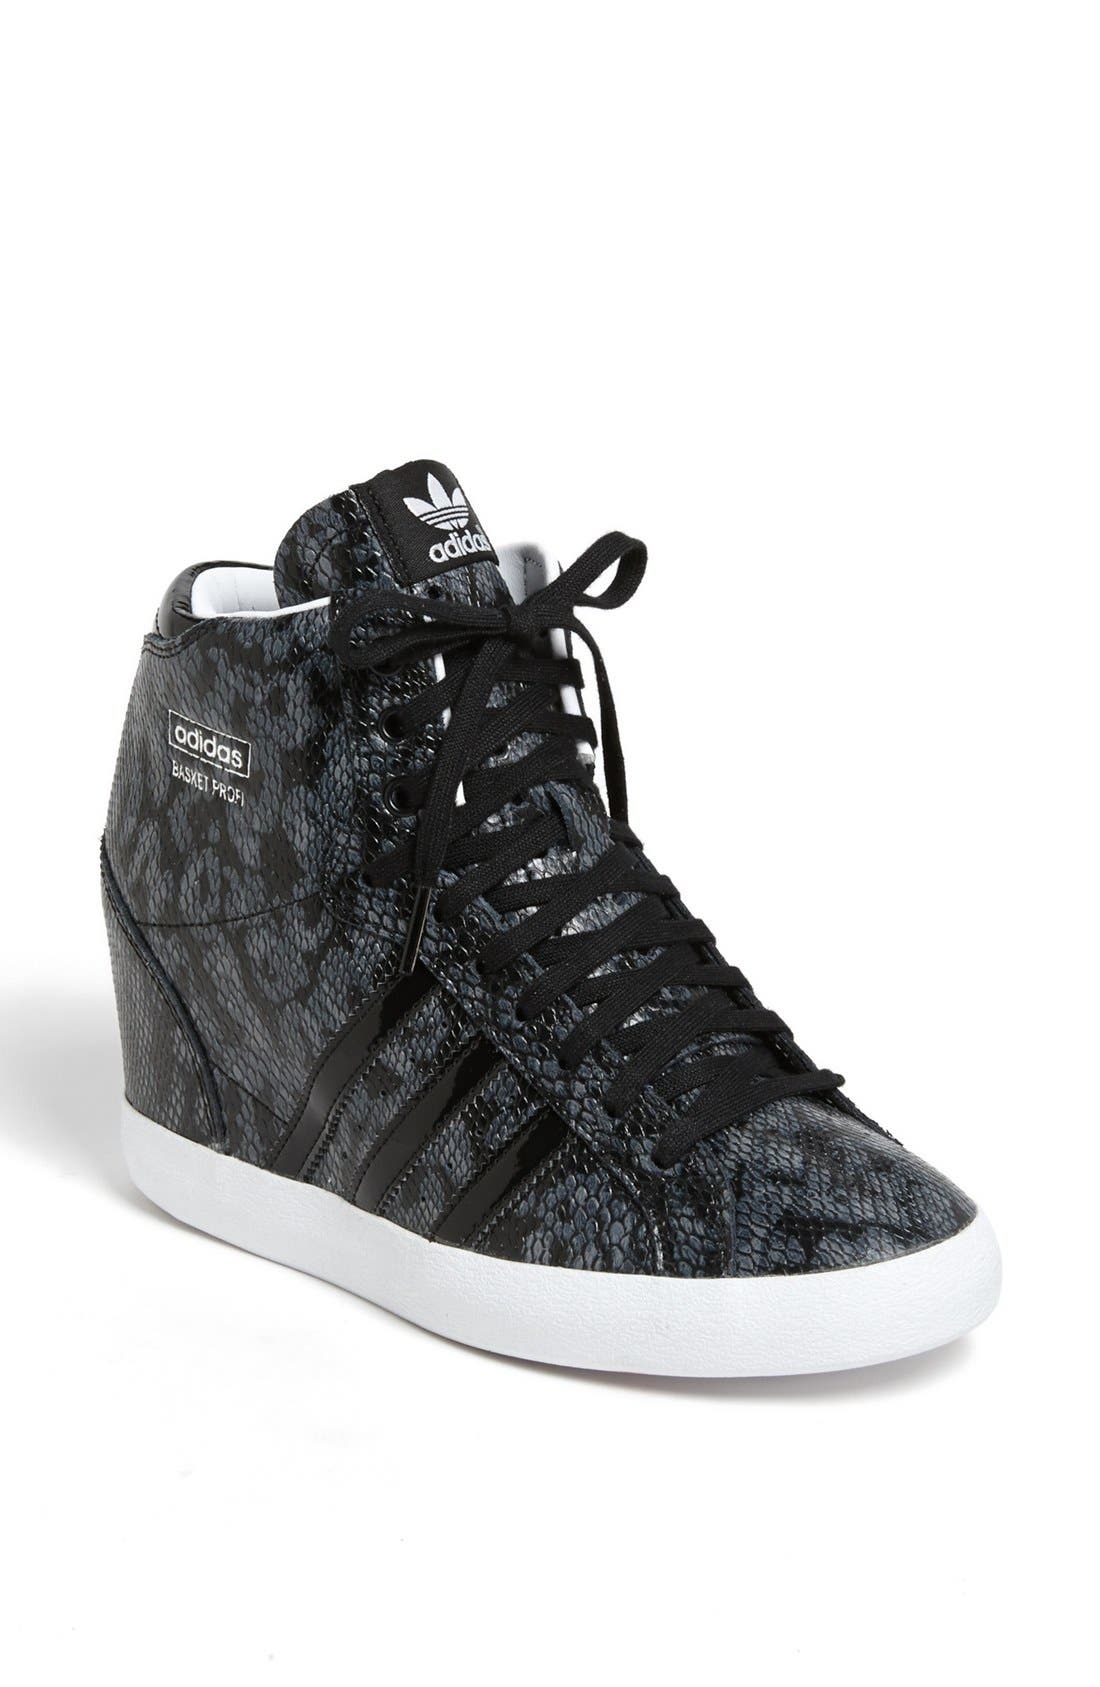 adidas wedge sneakers for women